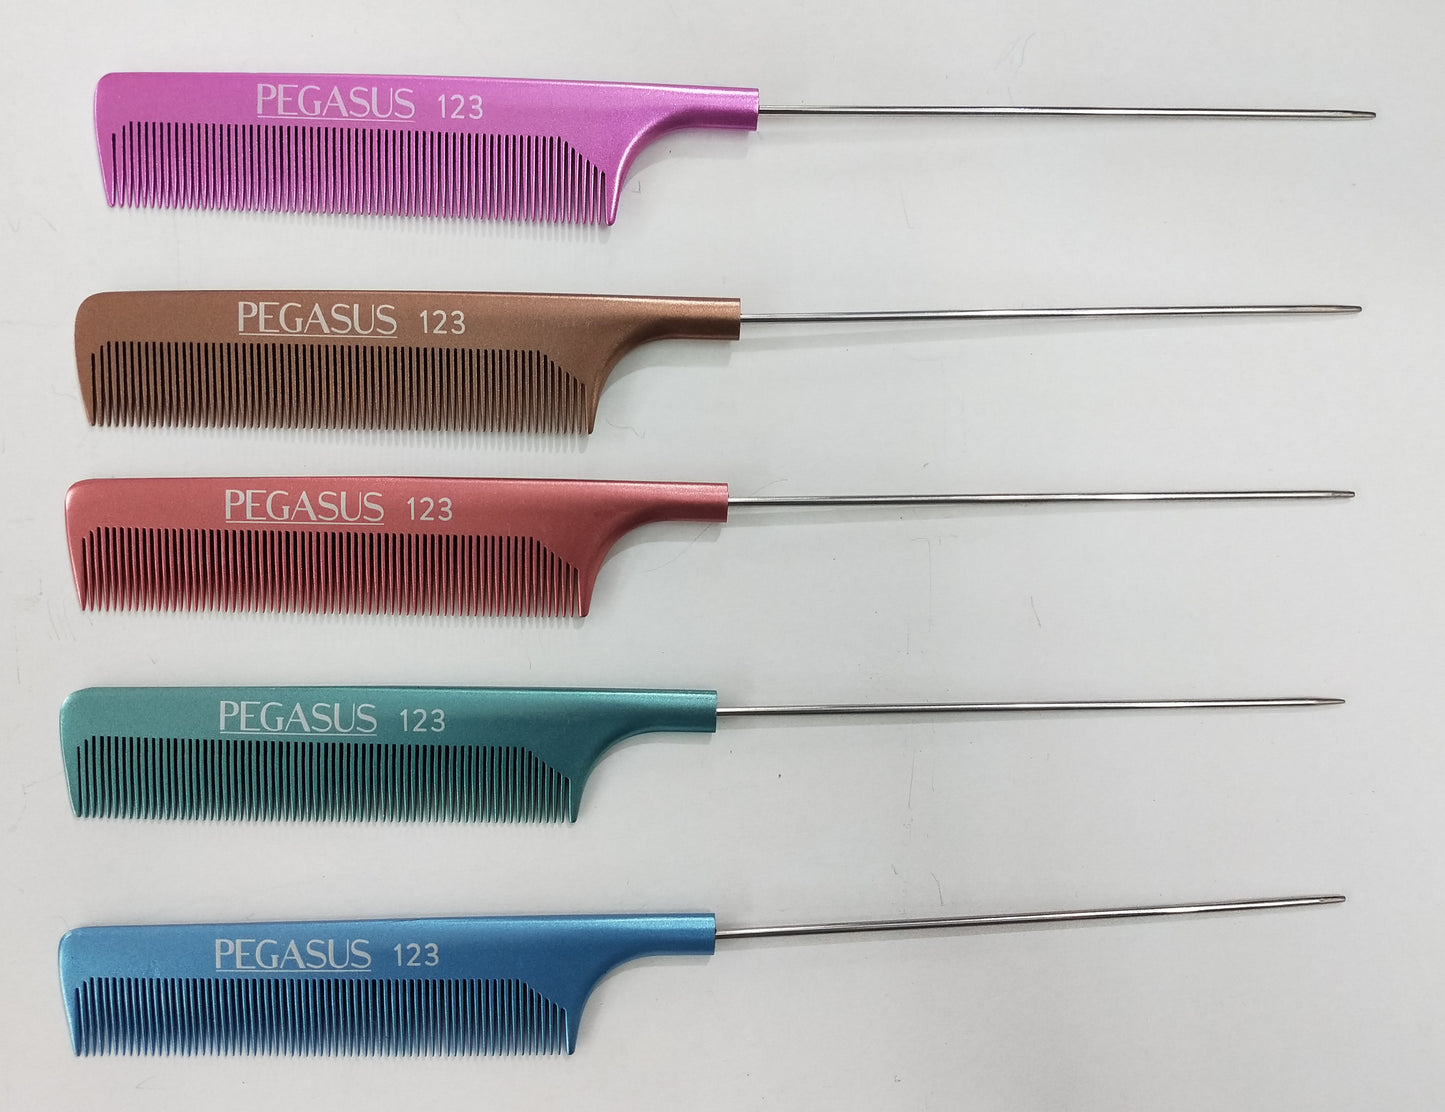 Pegasus MICOLOR 123, 9.75in Hard Rubber Fine Tooth Pintail Comb, Seamless, Anti Static, Heat and Chemically Resistant, Stainless Steel Pin, Great for Parting, Coloring Hair | Peines de goma dura - Blue